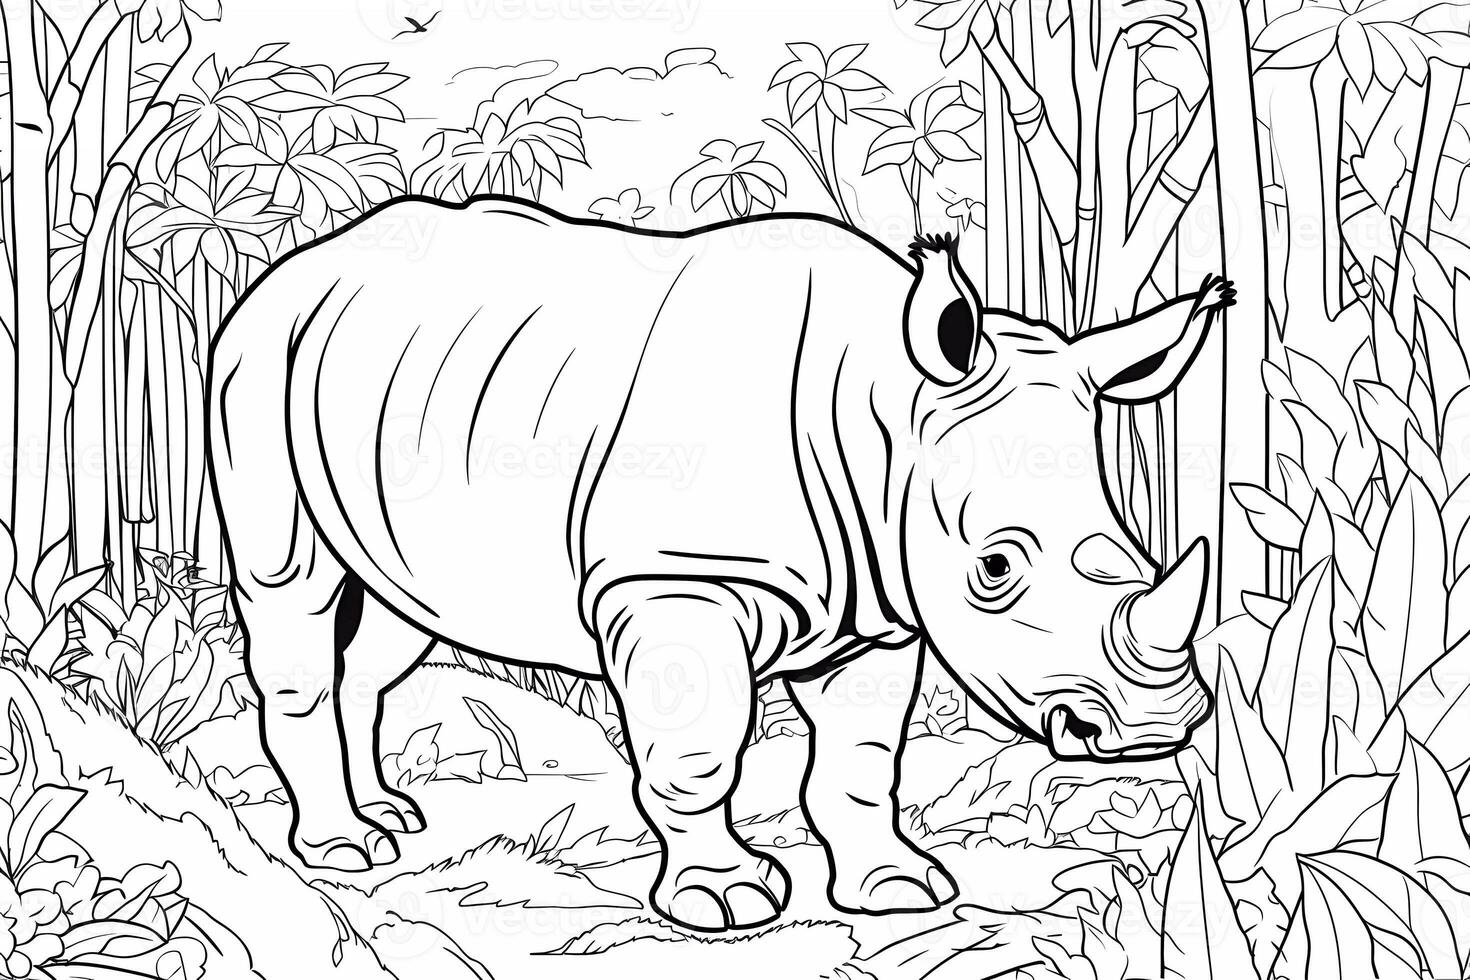 Educational printable coloring worksheet. Baby animal in jungle. Coloring dinosaur illustration. Coloring activity for children. photo